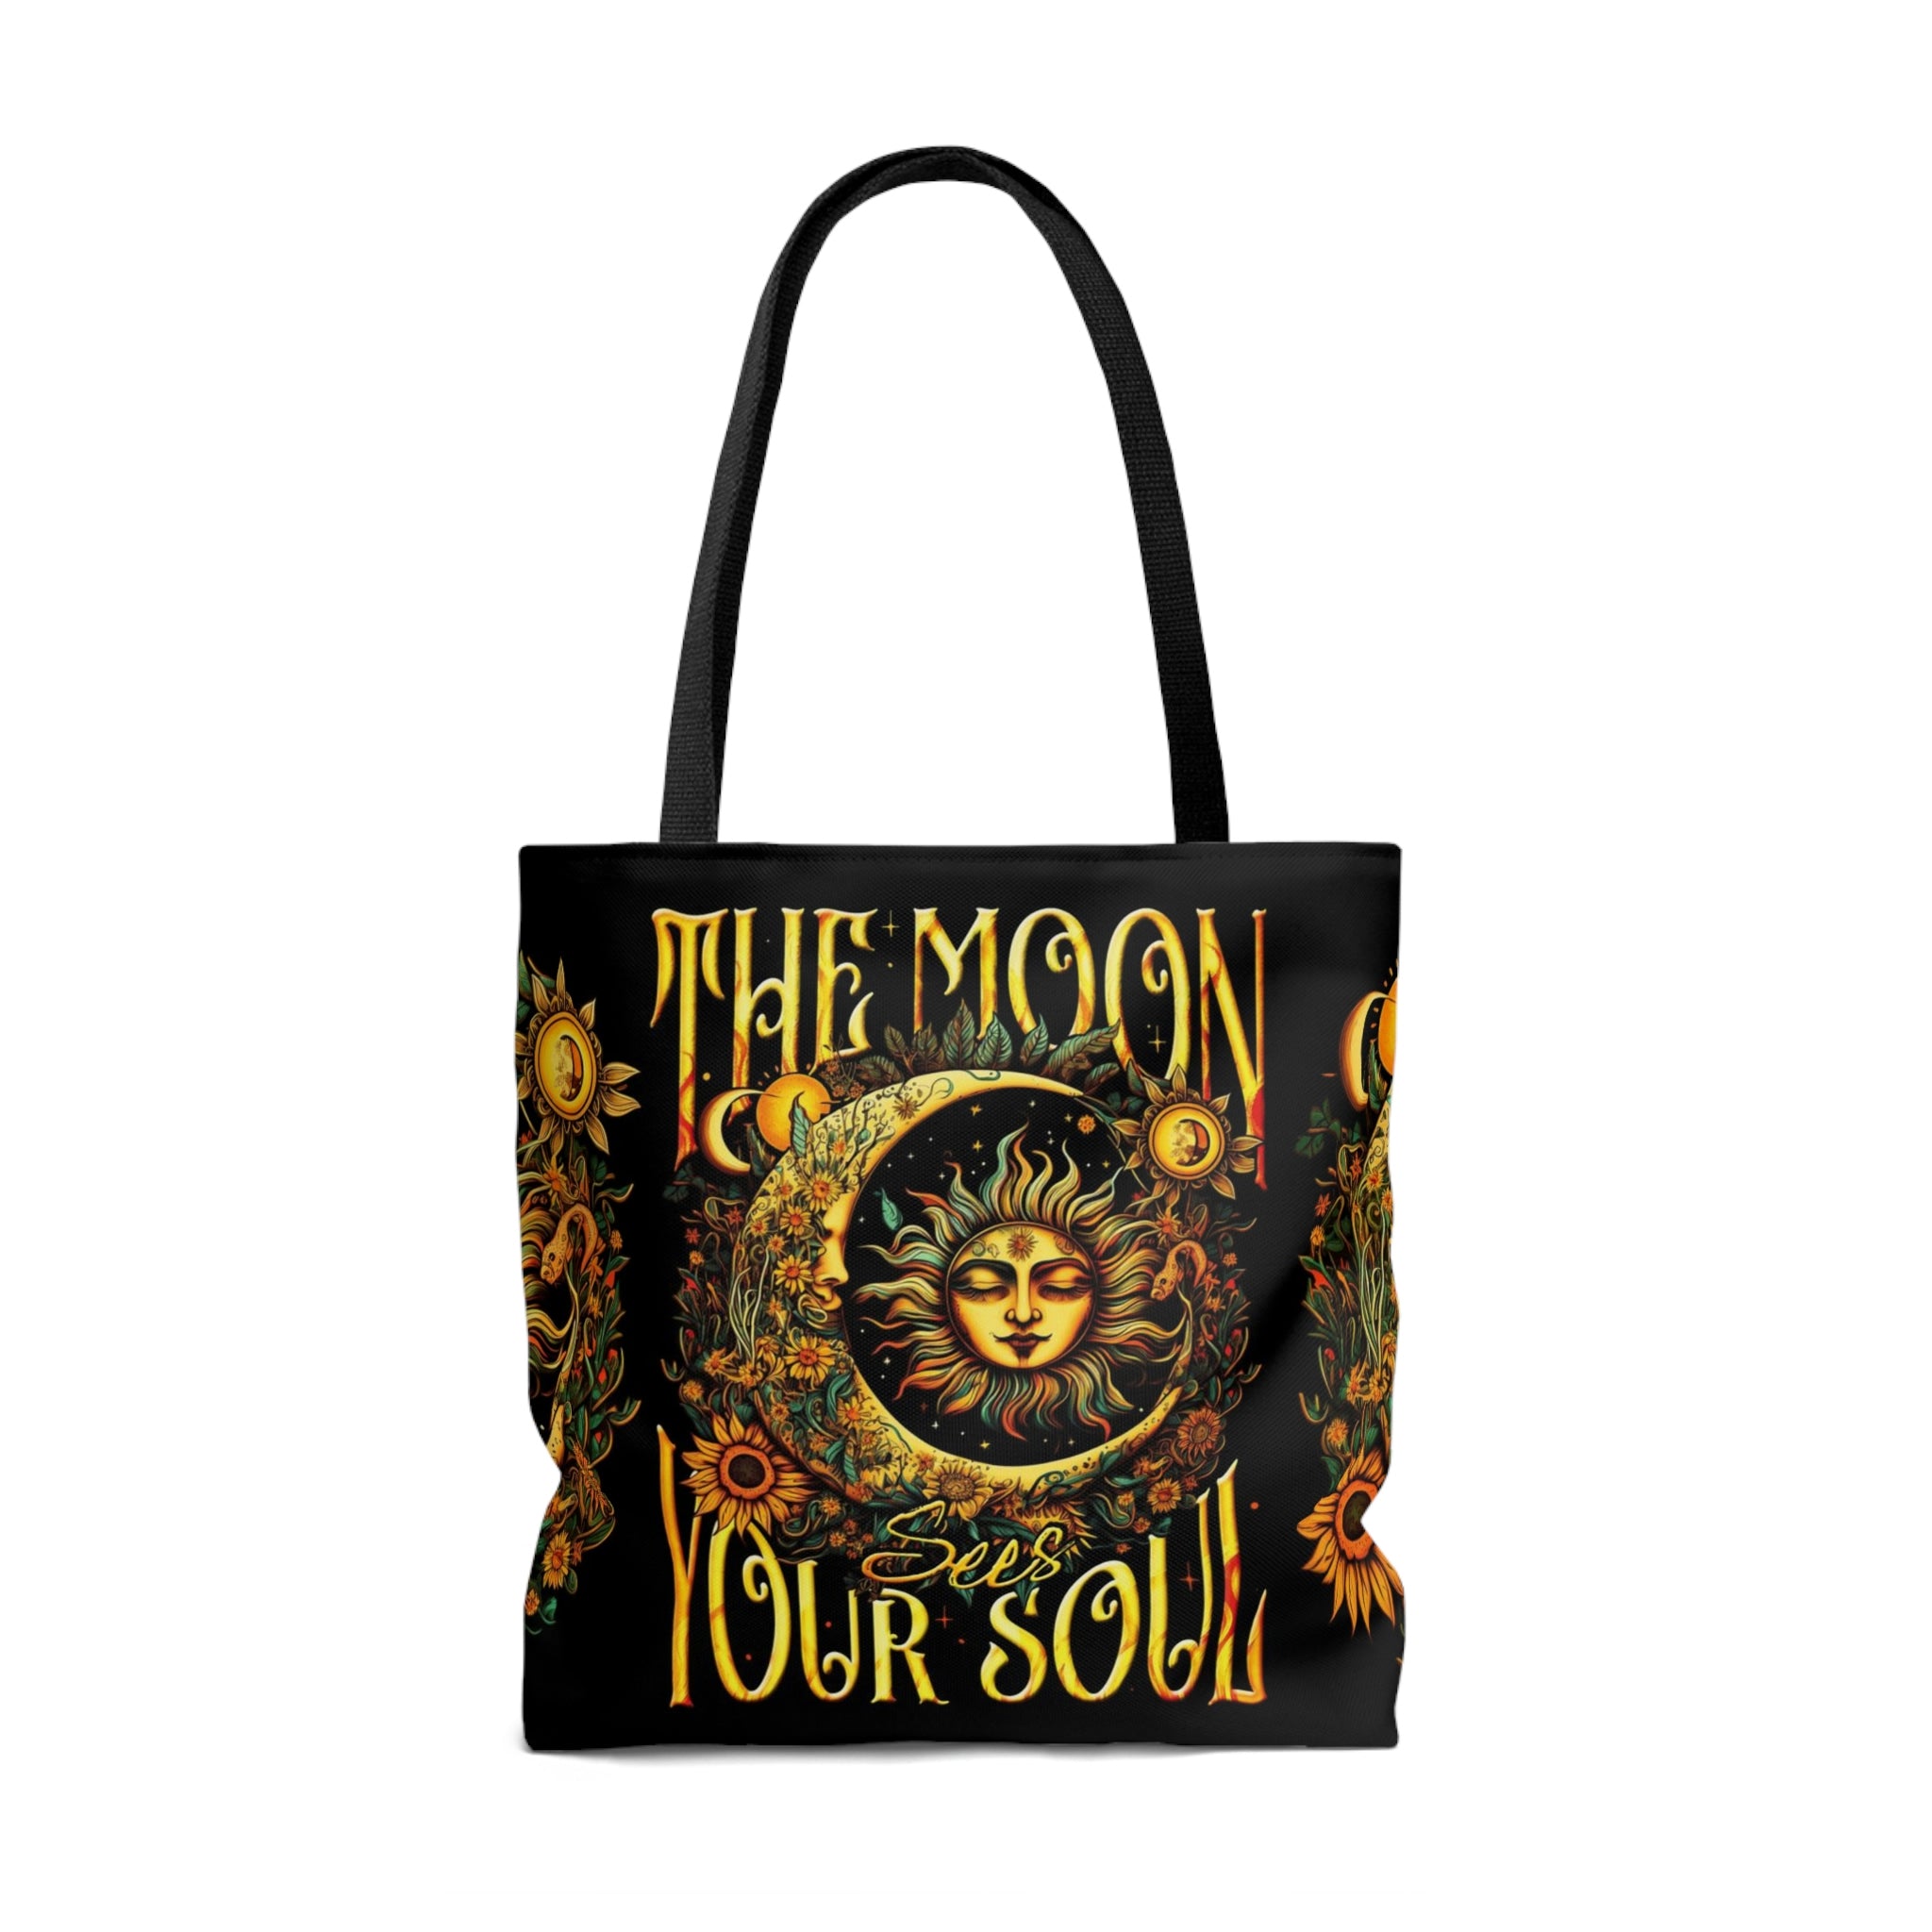 THE MOON SEES YOUR SOUL TOTE BAG - TY1104233